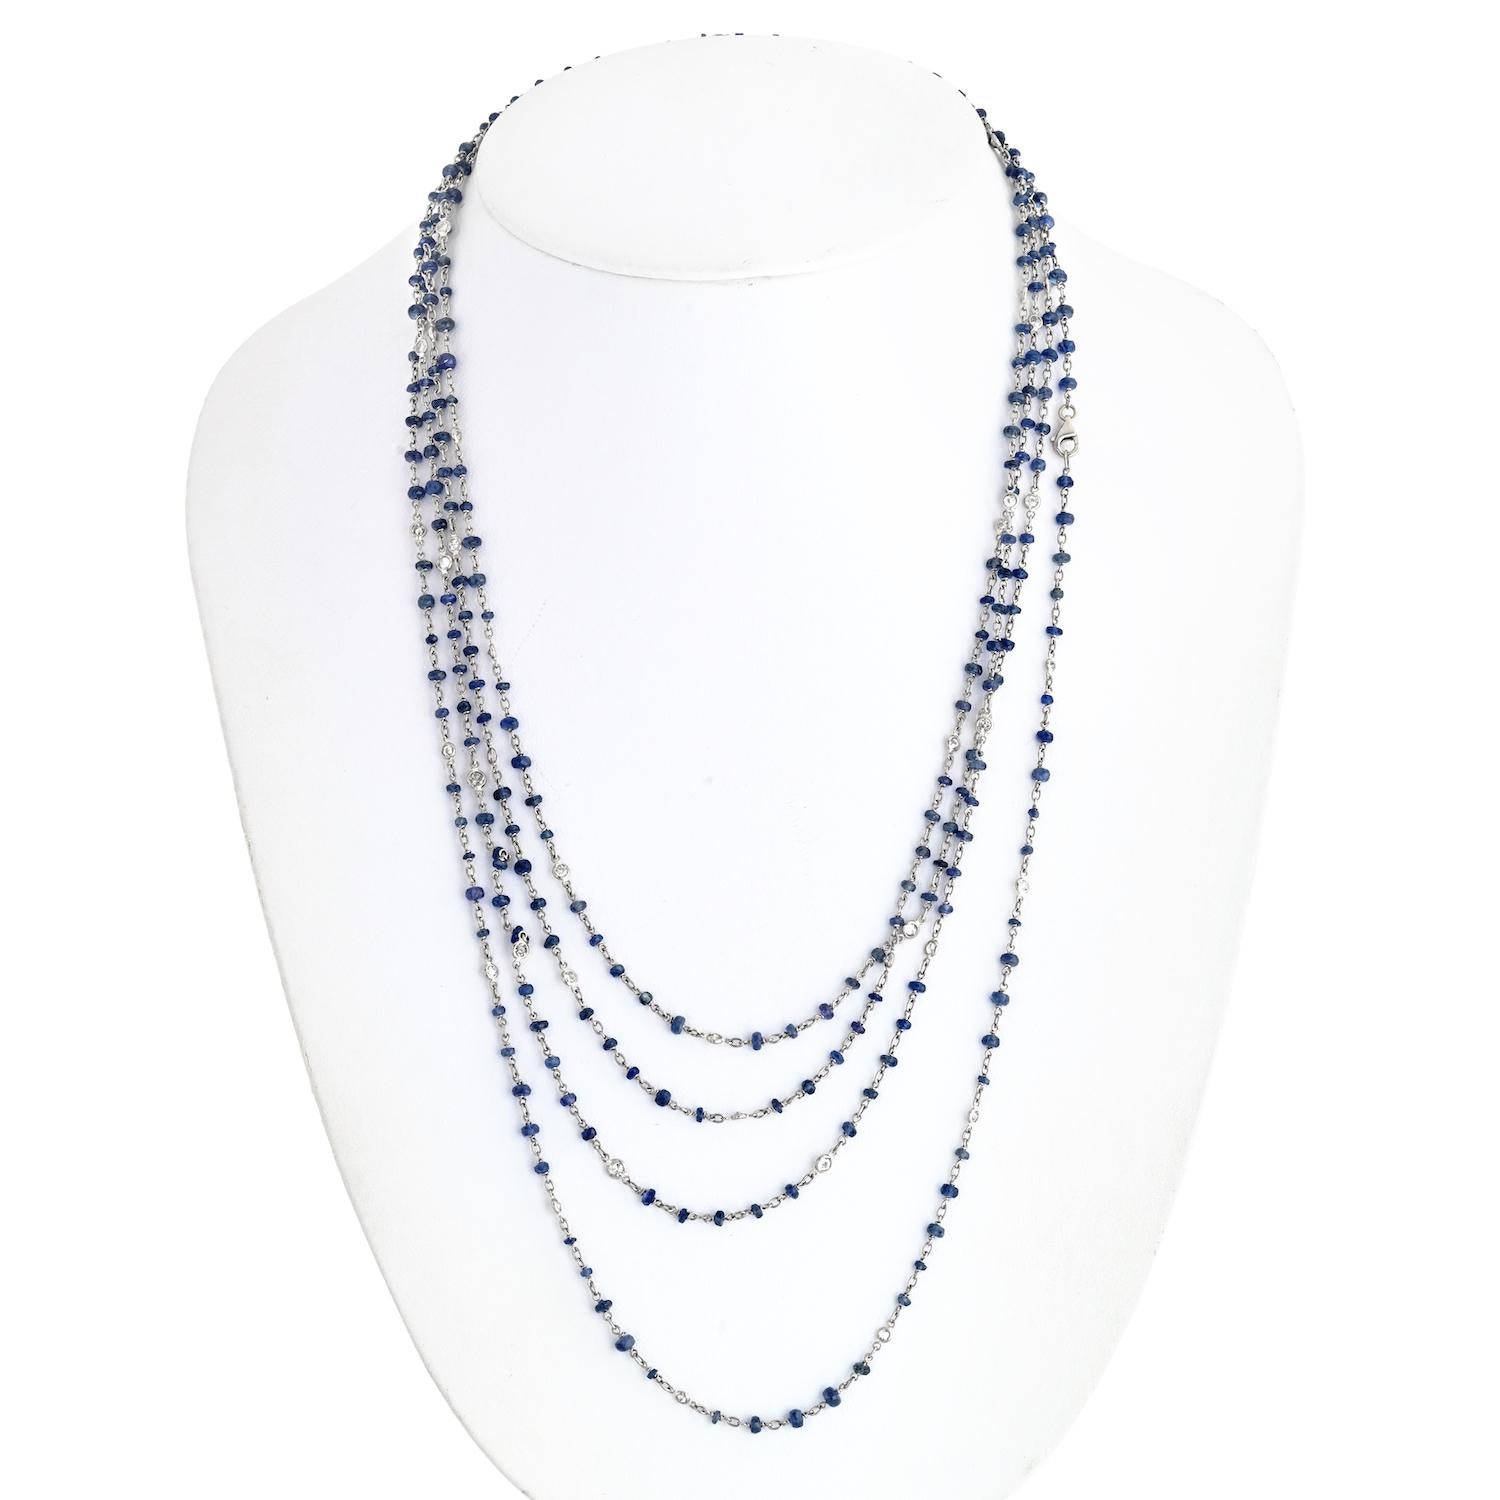 Indulge in the allure of this exquisite Sapphire And Diamond By The Yard 80 Inch Chain Necklace, a true embodiment of elegance and luxury. With an impressive 80-inch length, this necklace provides endless versatility and styling options, allowing